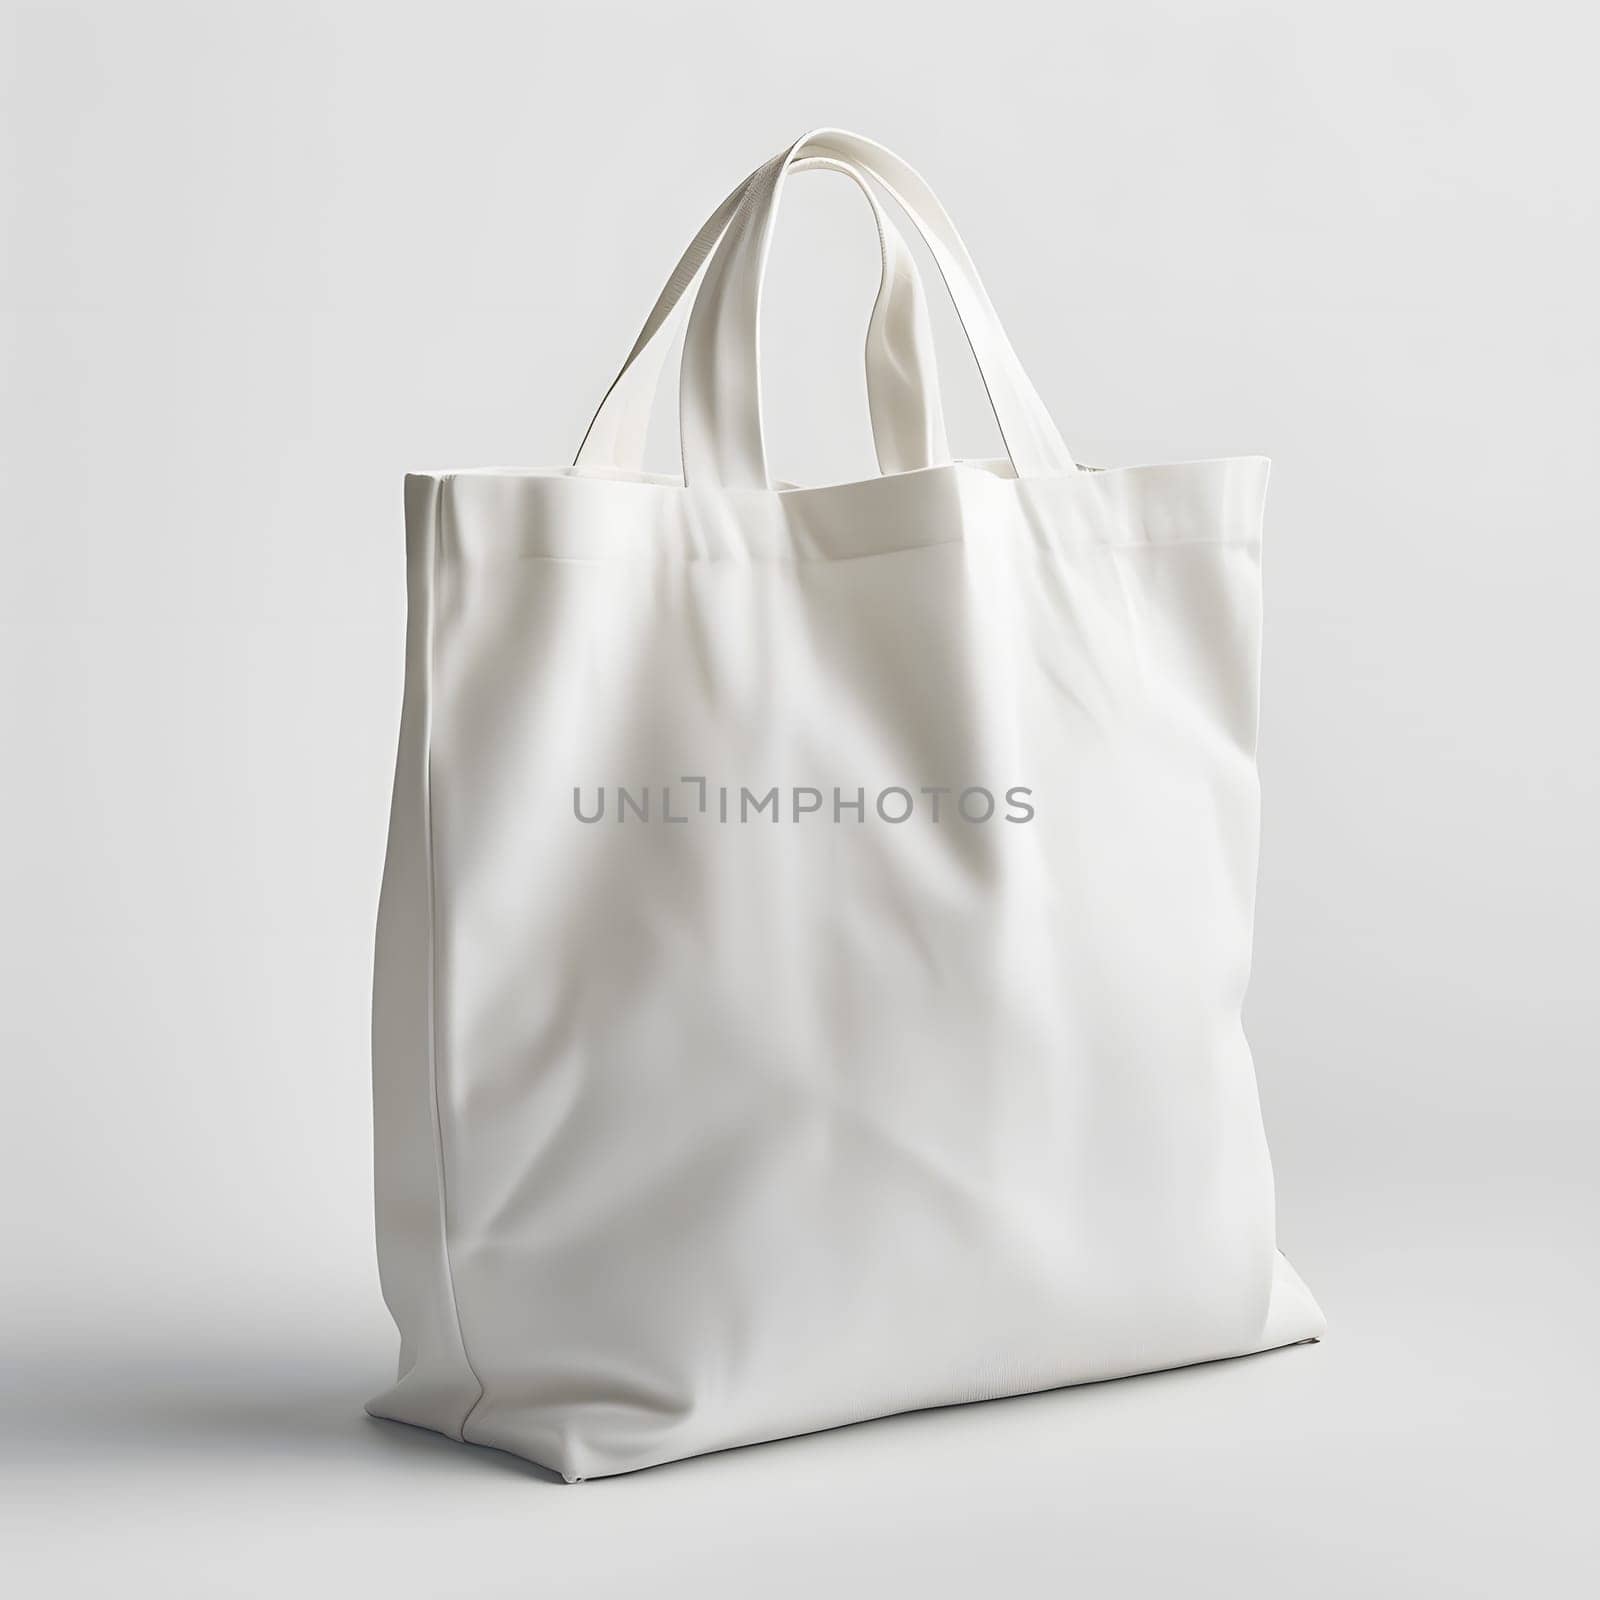 A white tote bag made of natural material is elegantly displayed on a white surface, highlighting its silver metal accents. This fashion accessory is perfect for any art event